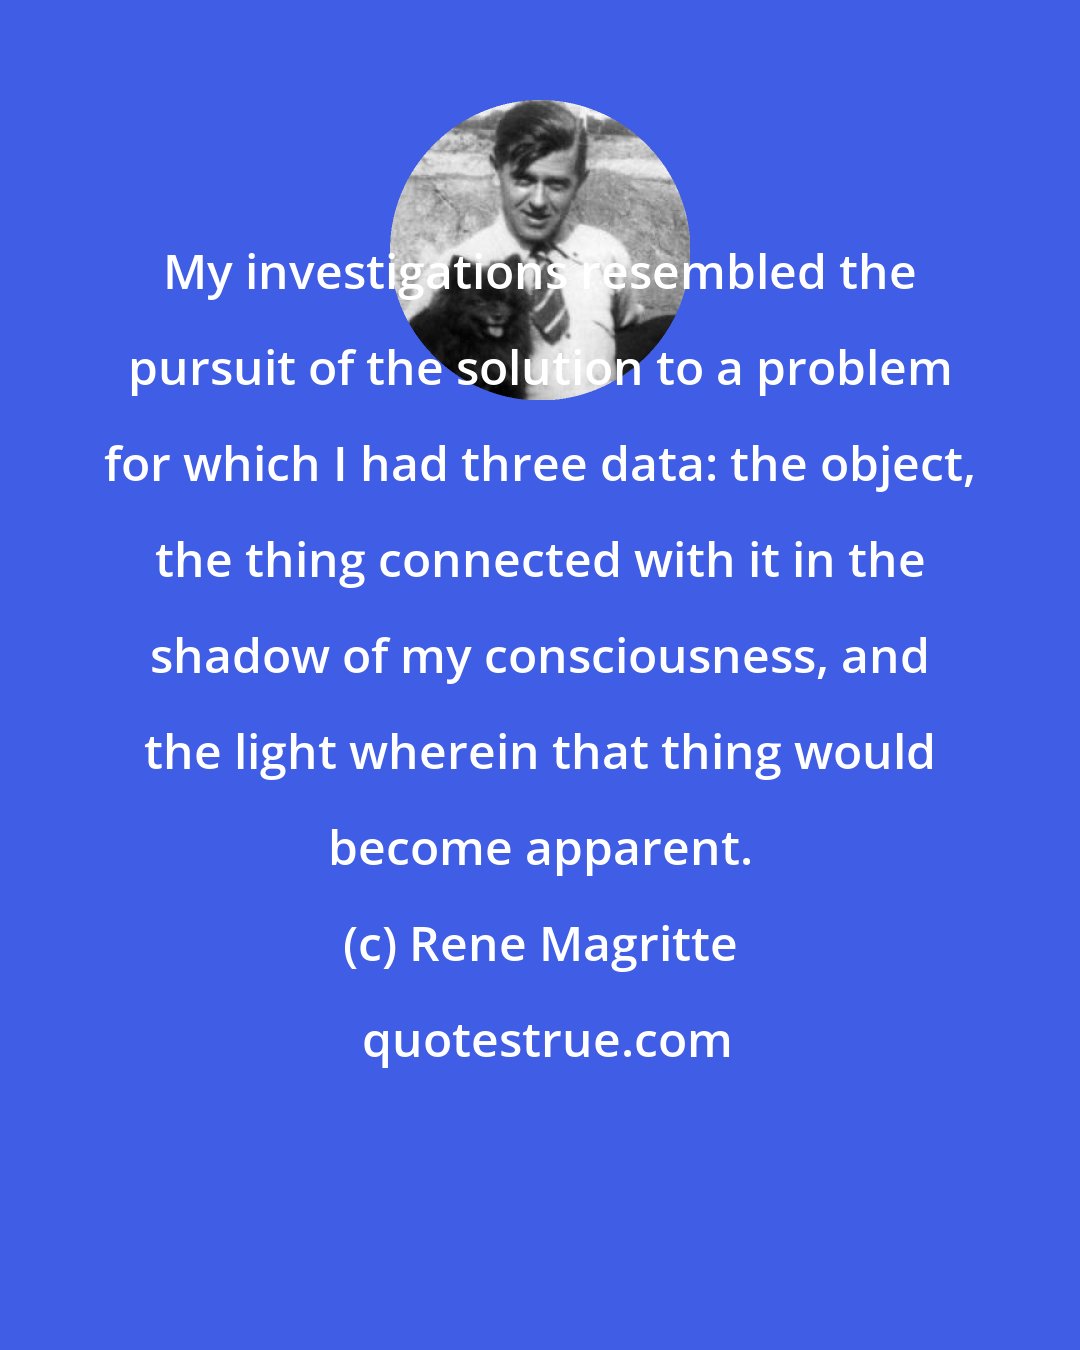 Rene Magritte: My investigations resembled the pursuit of the solution to a problem for which I had three data: the object, the thing connected with it in the shadow of my consciousness, and the light wherein that thing would become apparent.